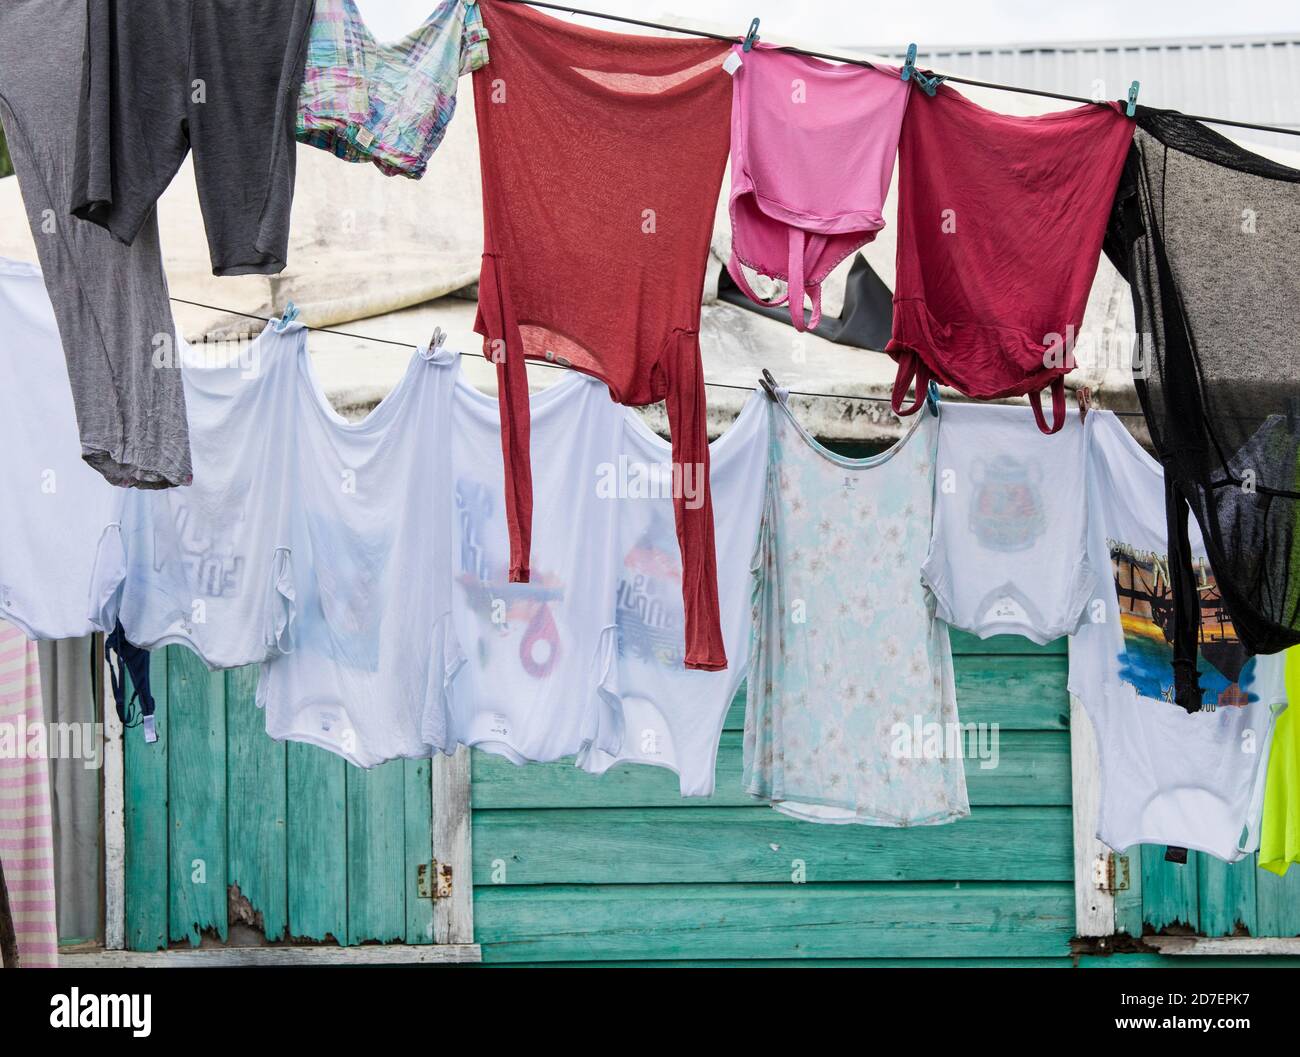 Laundry on a line blowing in the breeze in Roatan, Honduras. Stock Photo